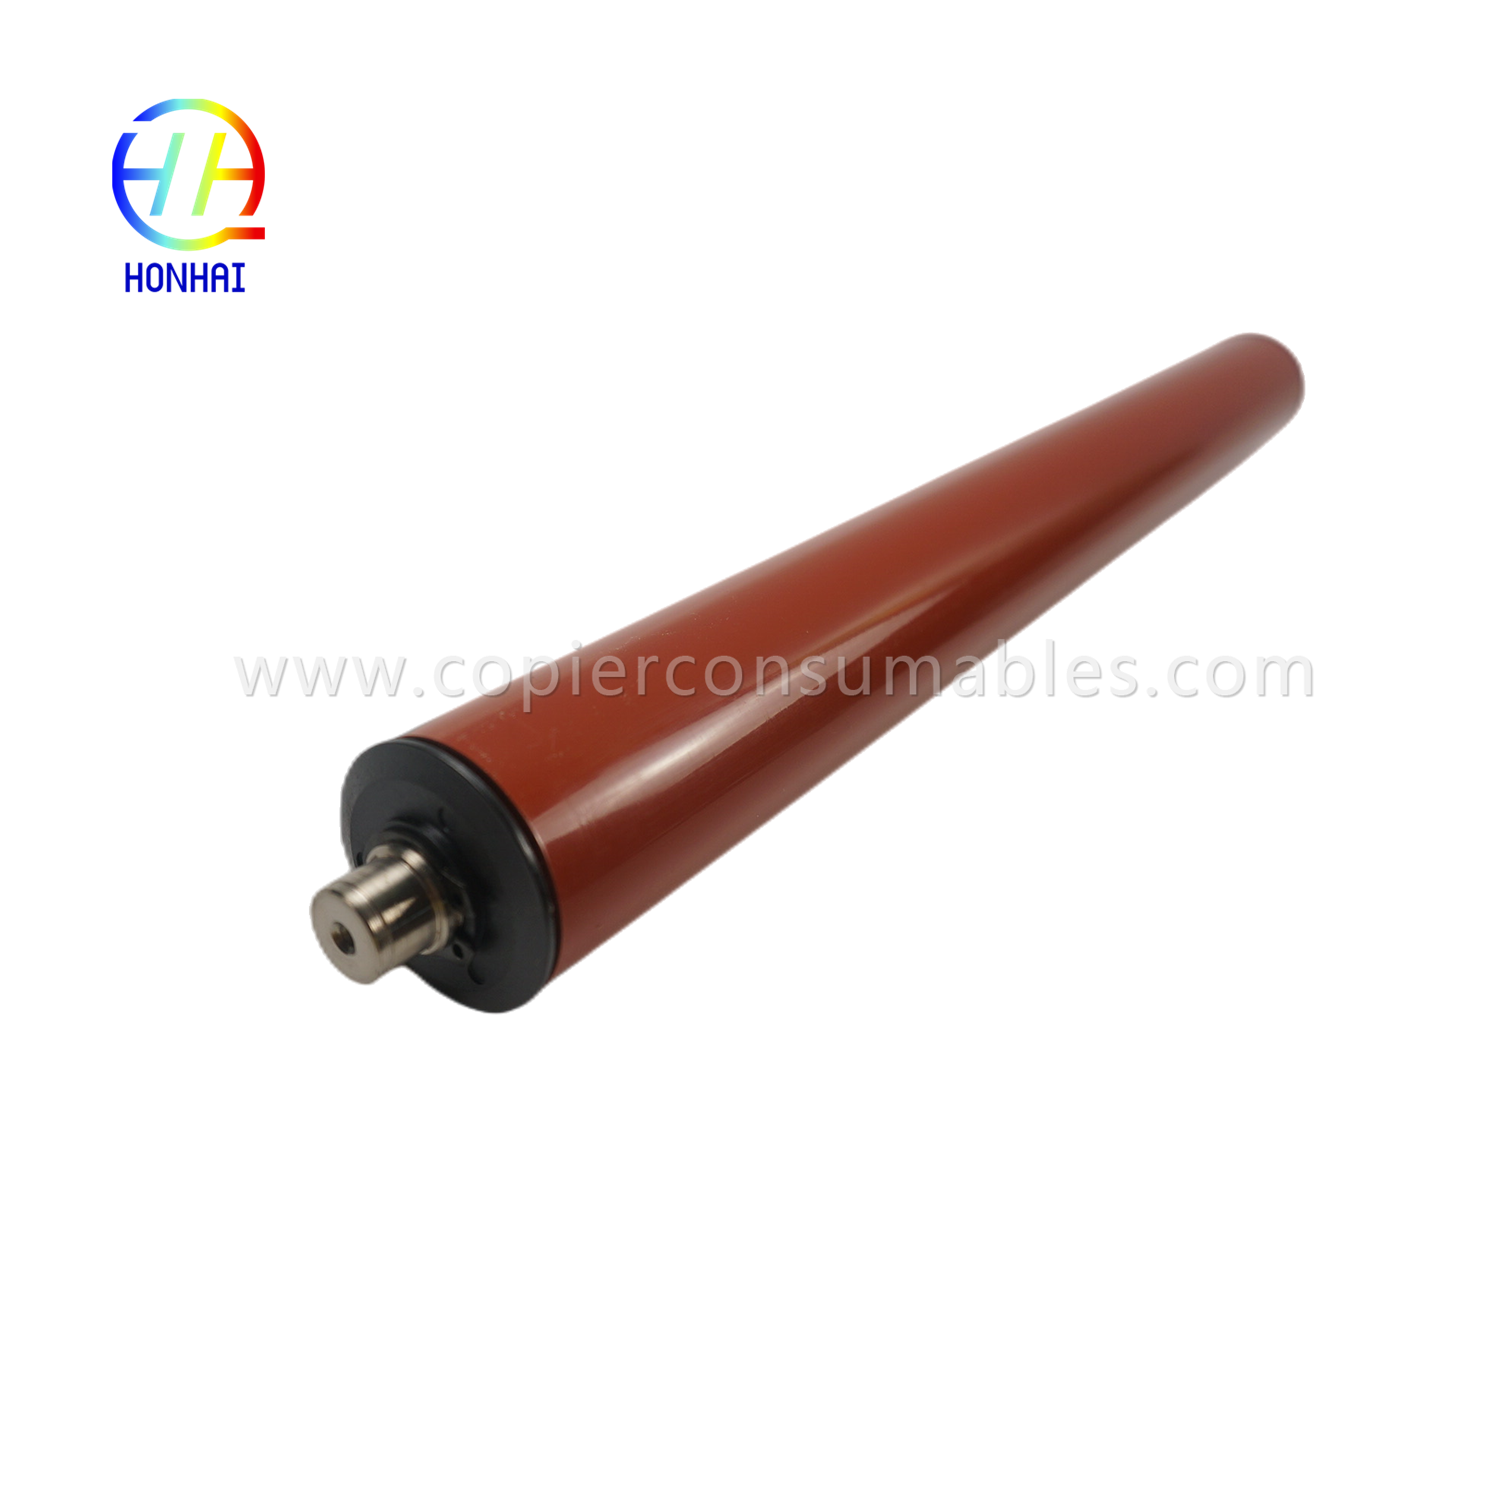 https://www.copierconsumables.com/upper-fuser-roller-for-ricoh-mpc3001-3501-product/